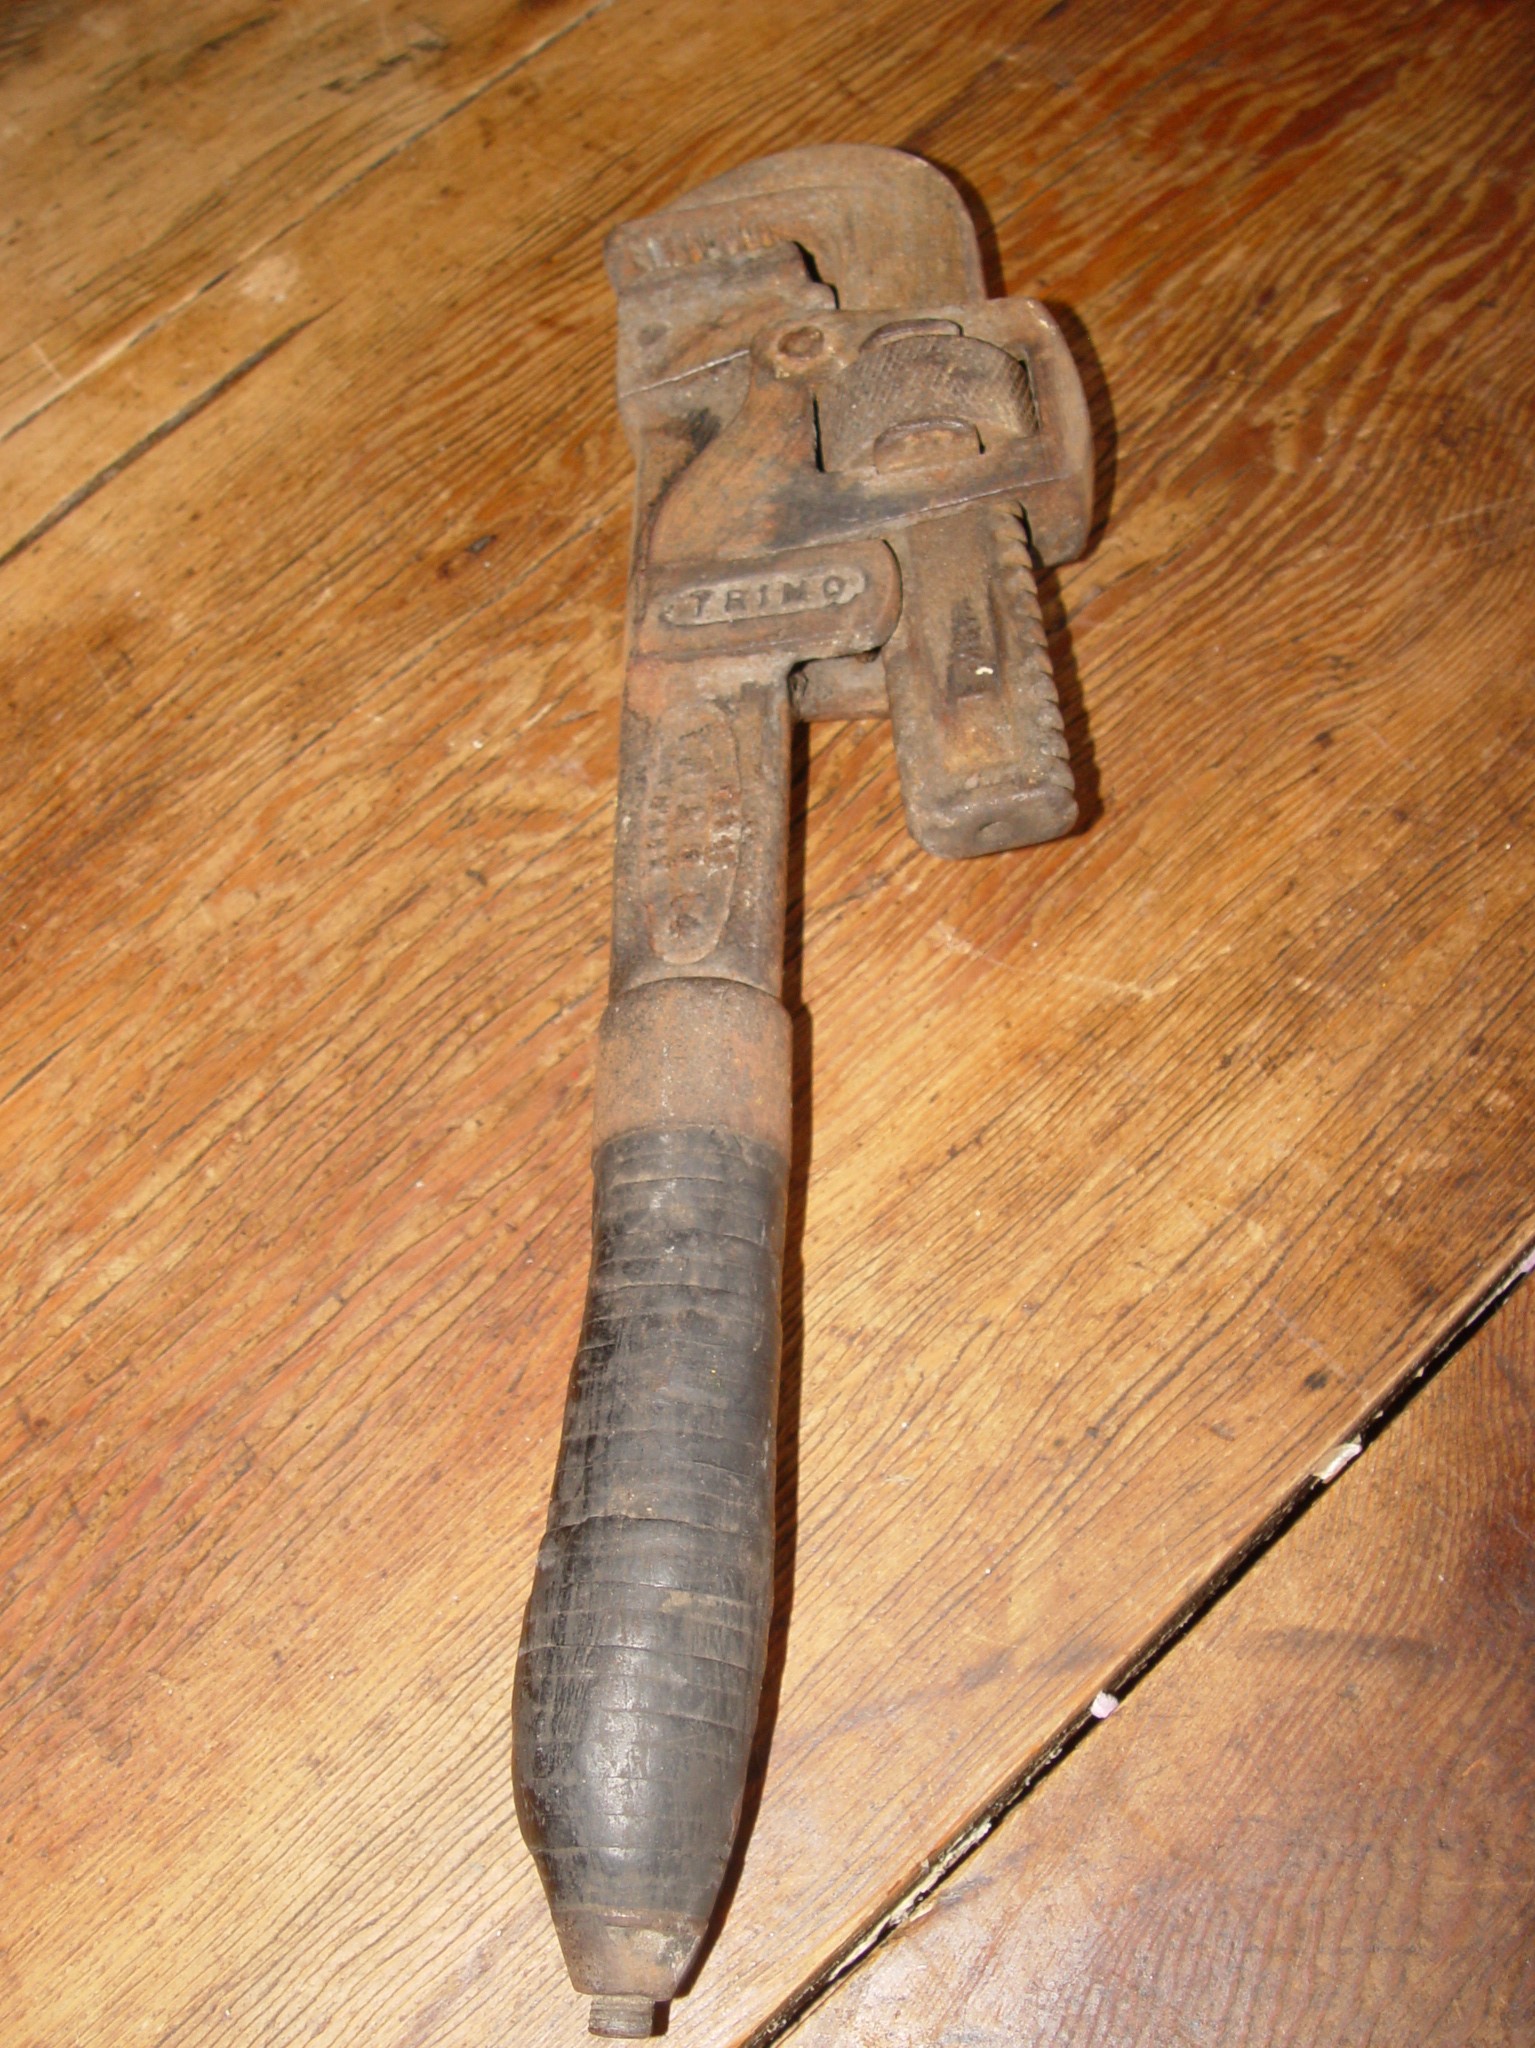 19th c.
                                Trimo Trimont Mark 14 Roxbury Forged
                                12" Monkey Pipe Wrench